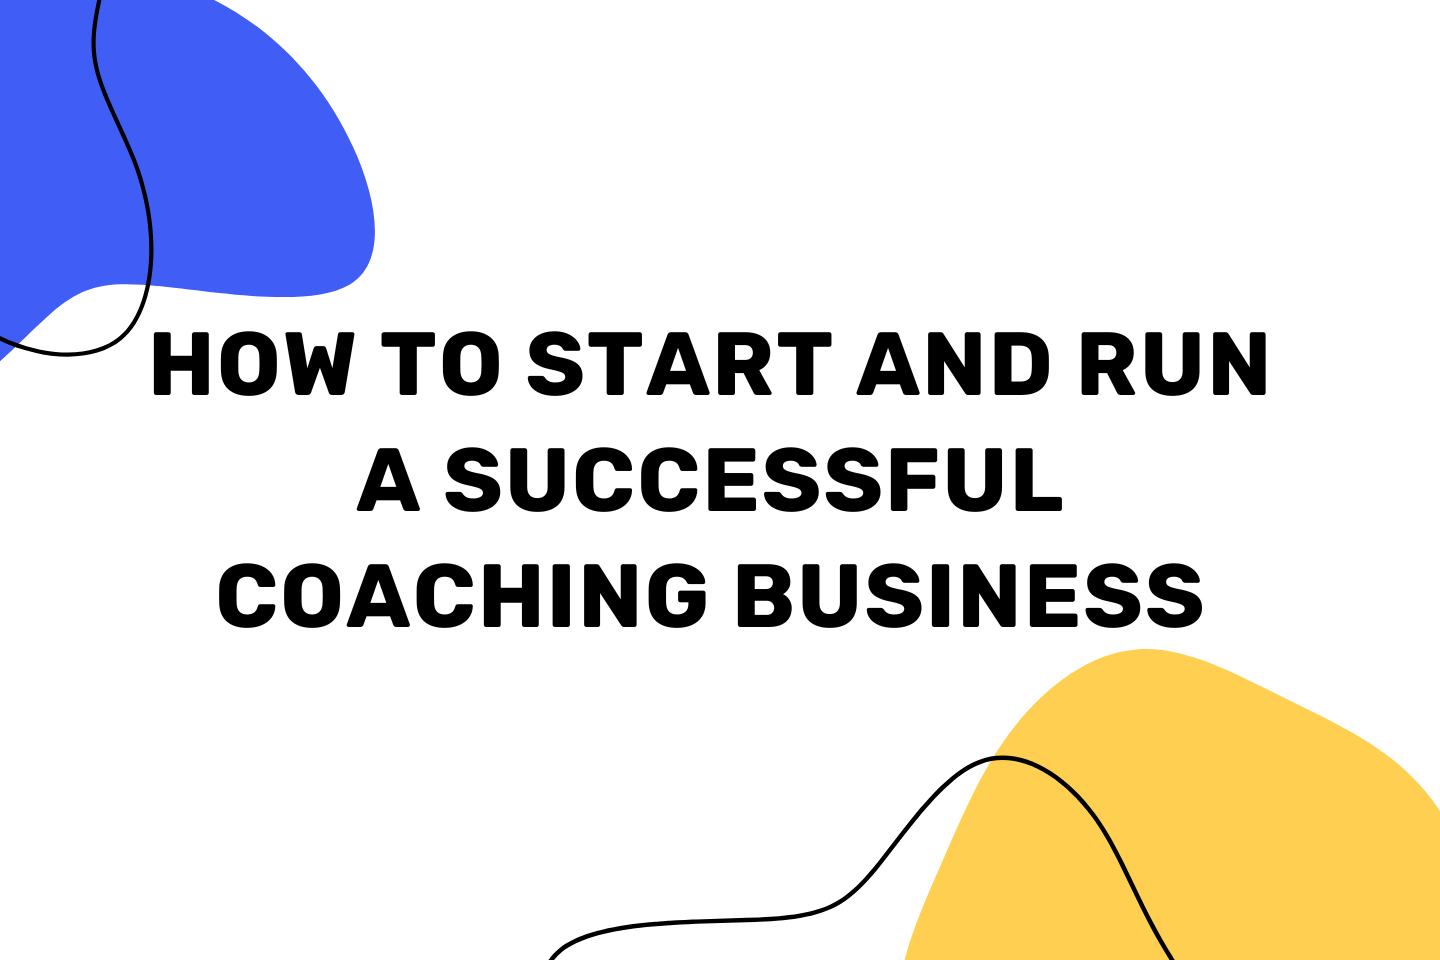 How To Start And Run A Successful Coaching Business